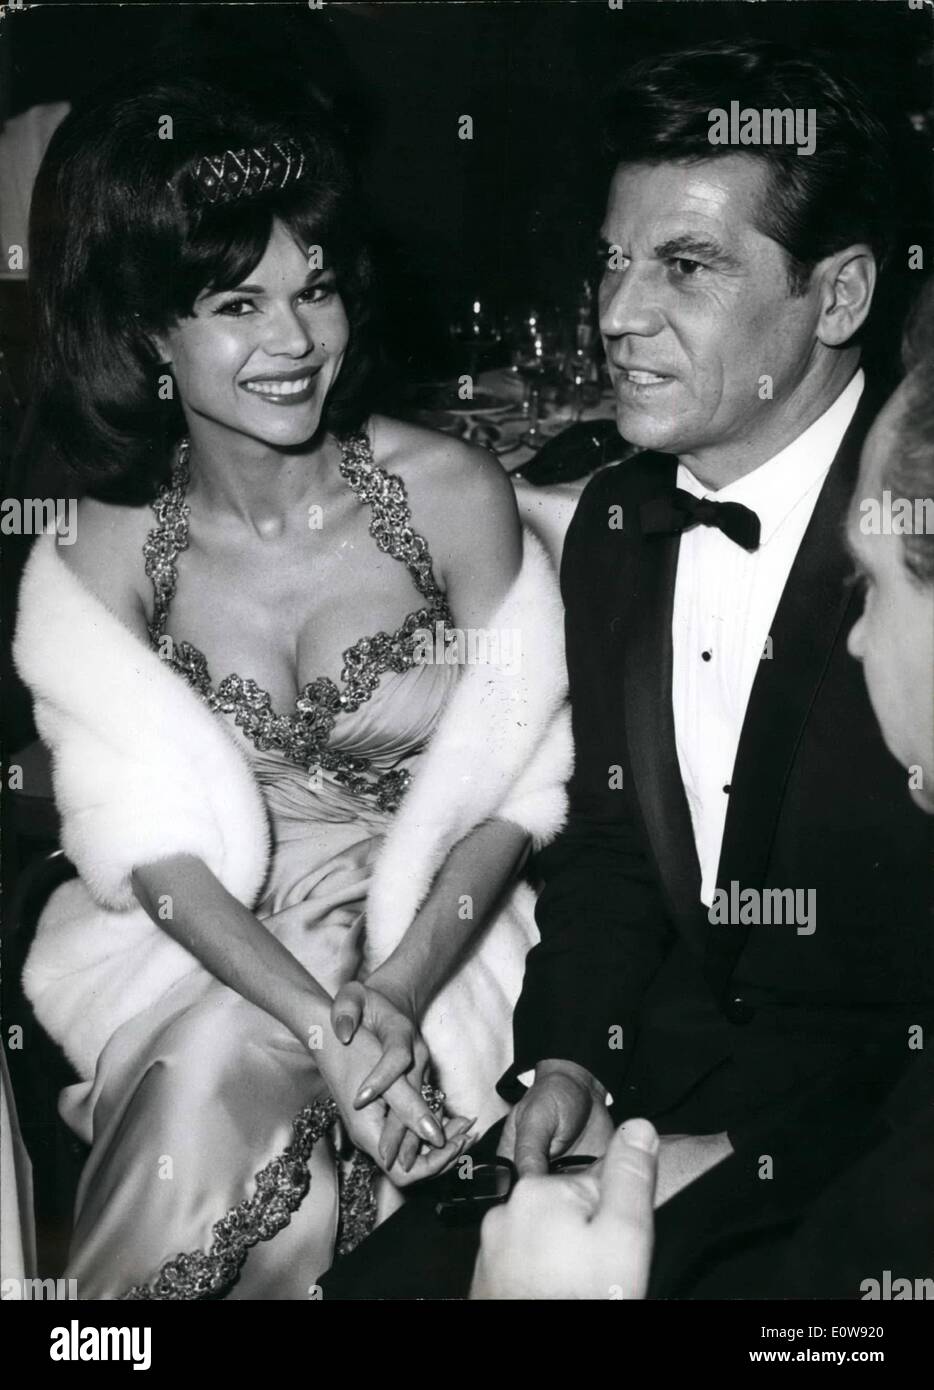 Feb. 02, 1962 - Bal pare in Munich; Many famous people were guests at the Bal Pare held in Munich on Feb. 16th, in the Hotel Bayericher hof. Photo Shows Laya Raki, the German actress who became rather popular not only by her films but also by her scandals, with her husband, Ray Rondell. Stock Photo